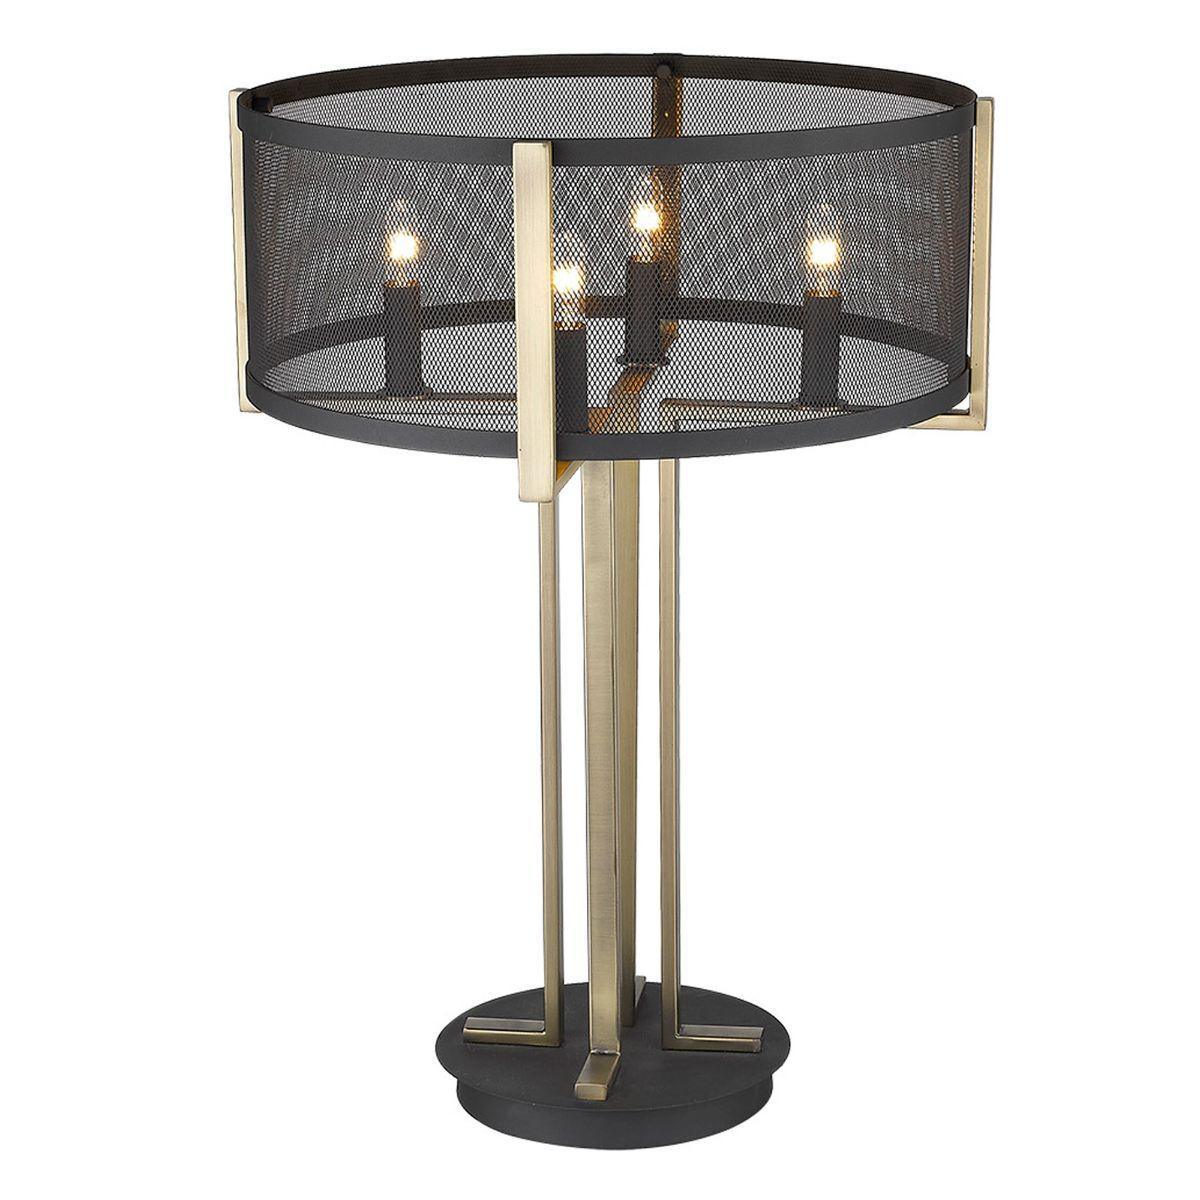 Trend Home 4 Lights Table Lamp Matte Black and Gold Finish